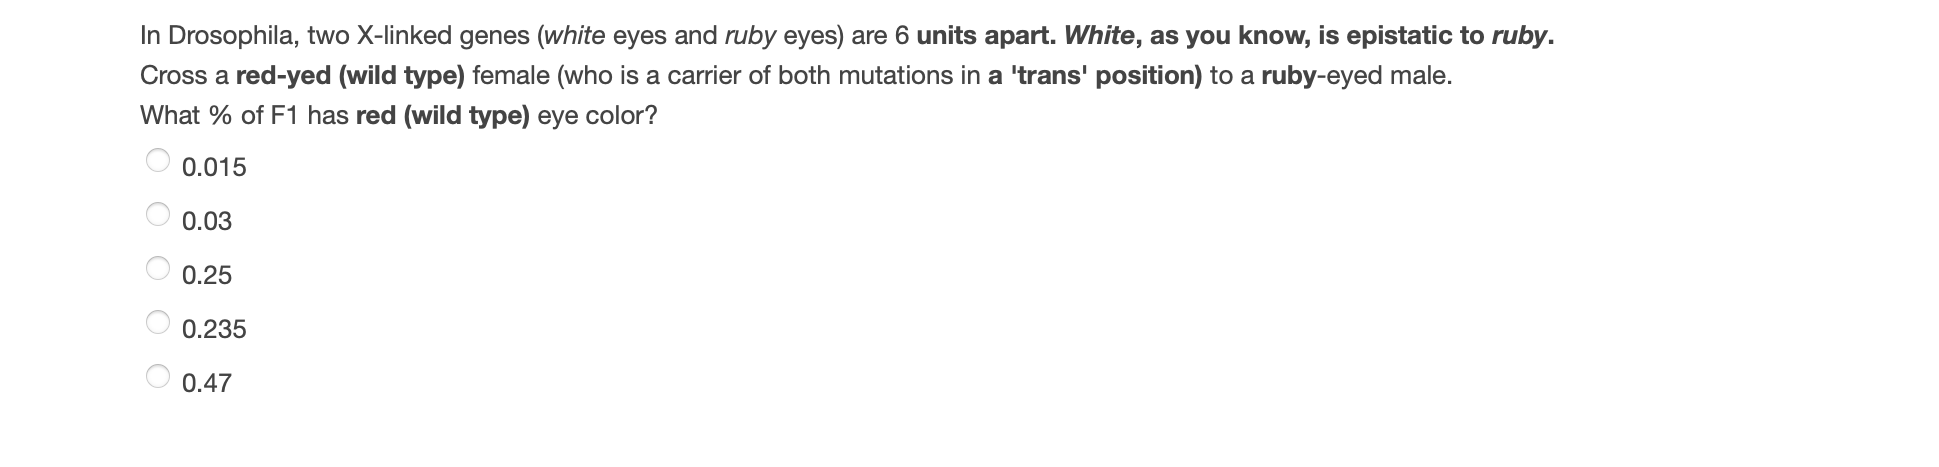 In Drosophila, two X-linked genes (white eyes and ruby eyes) are 6 units apart. White, as you know, is epistatic to ruby. Cro